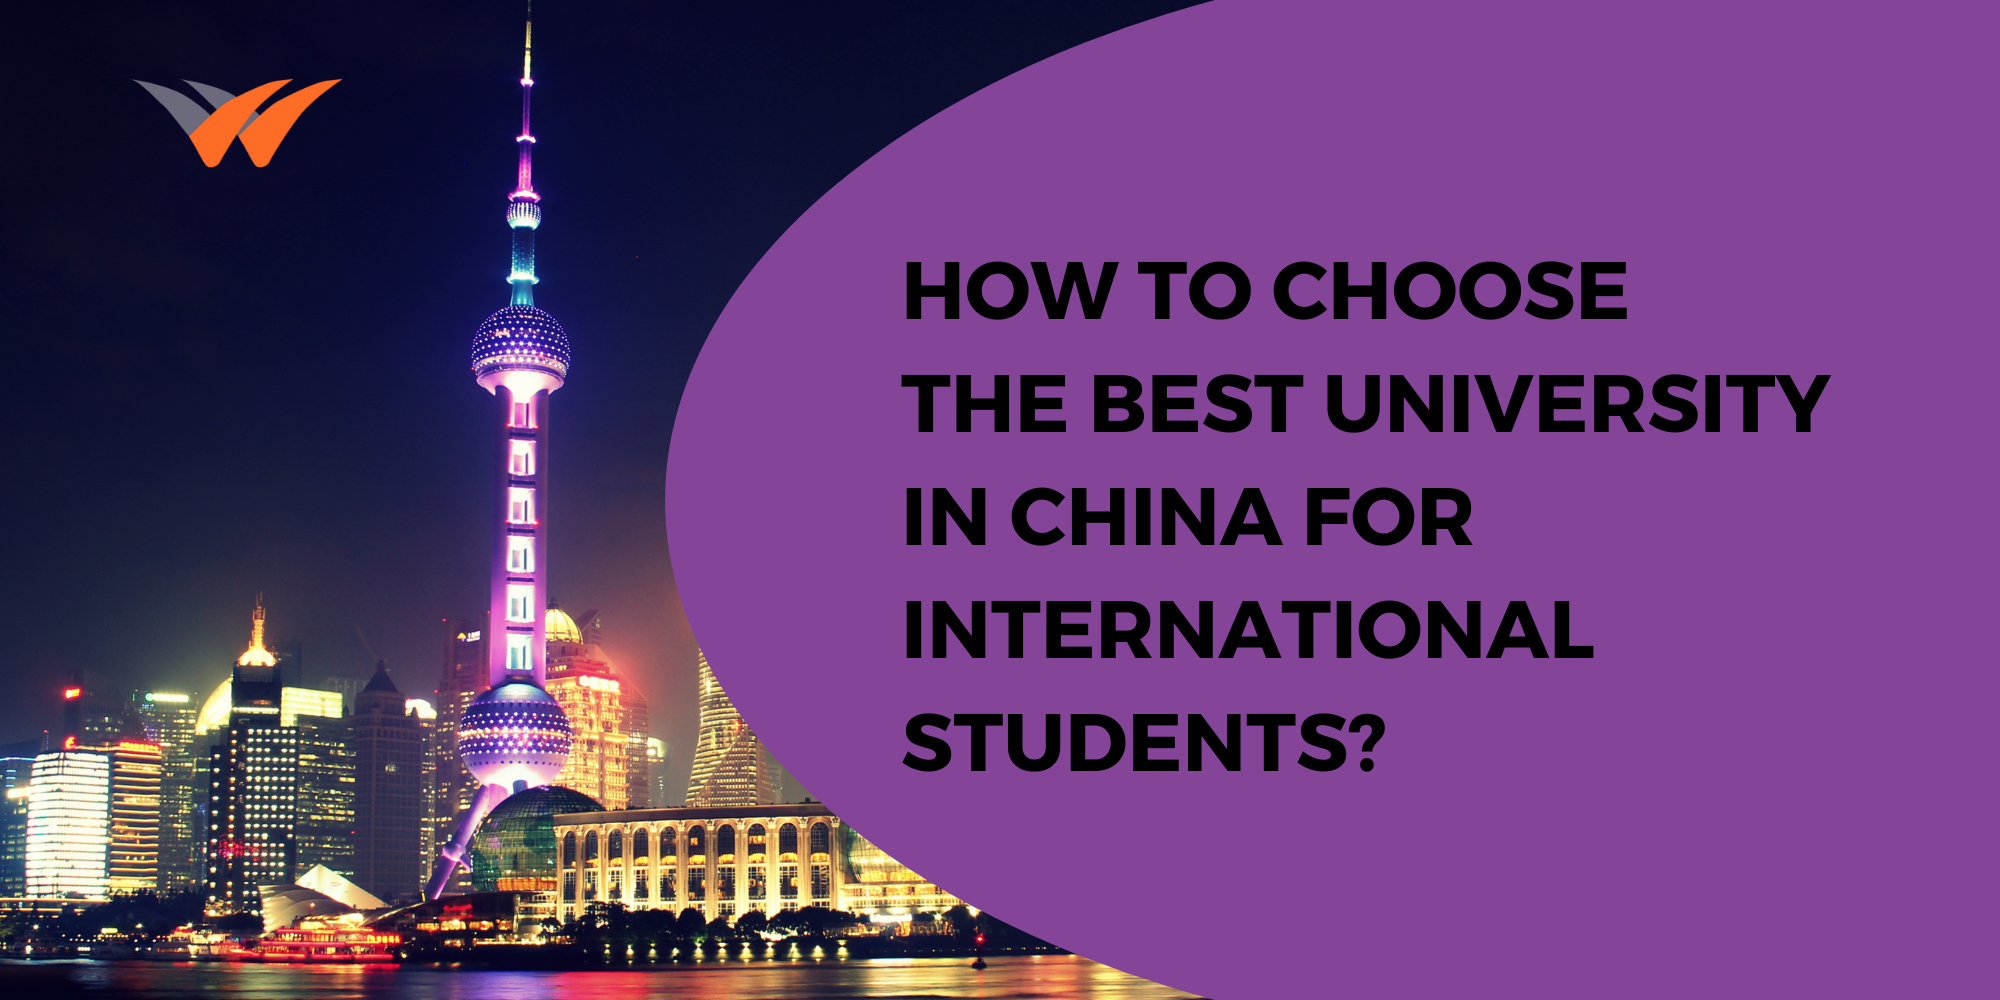 How to Choose the Best University in China for International Students?